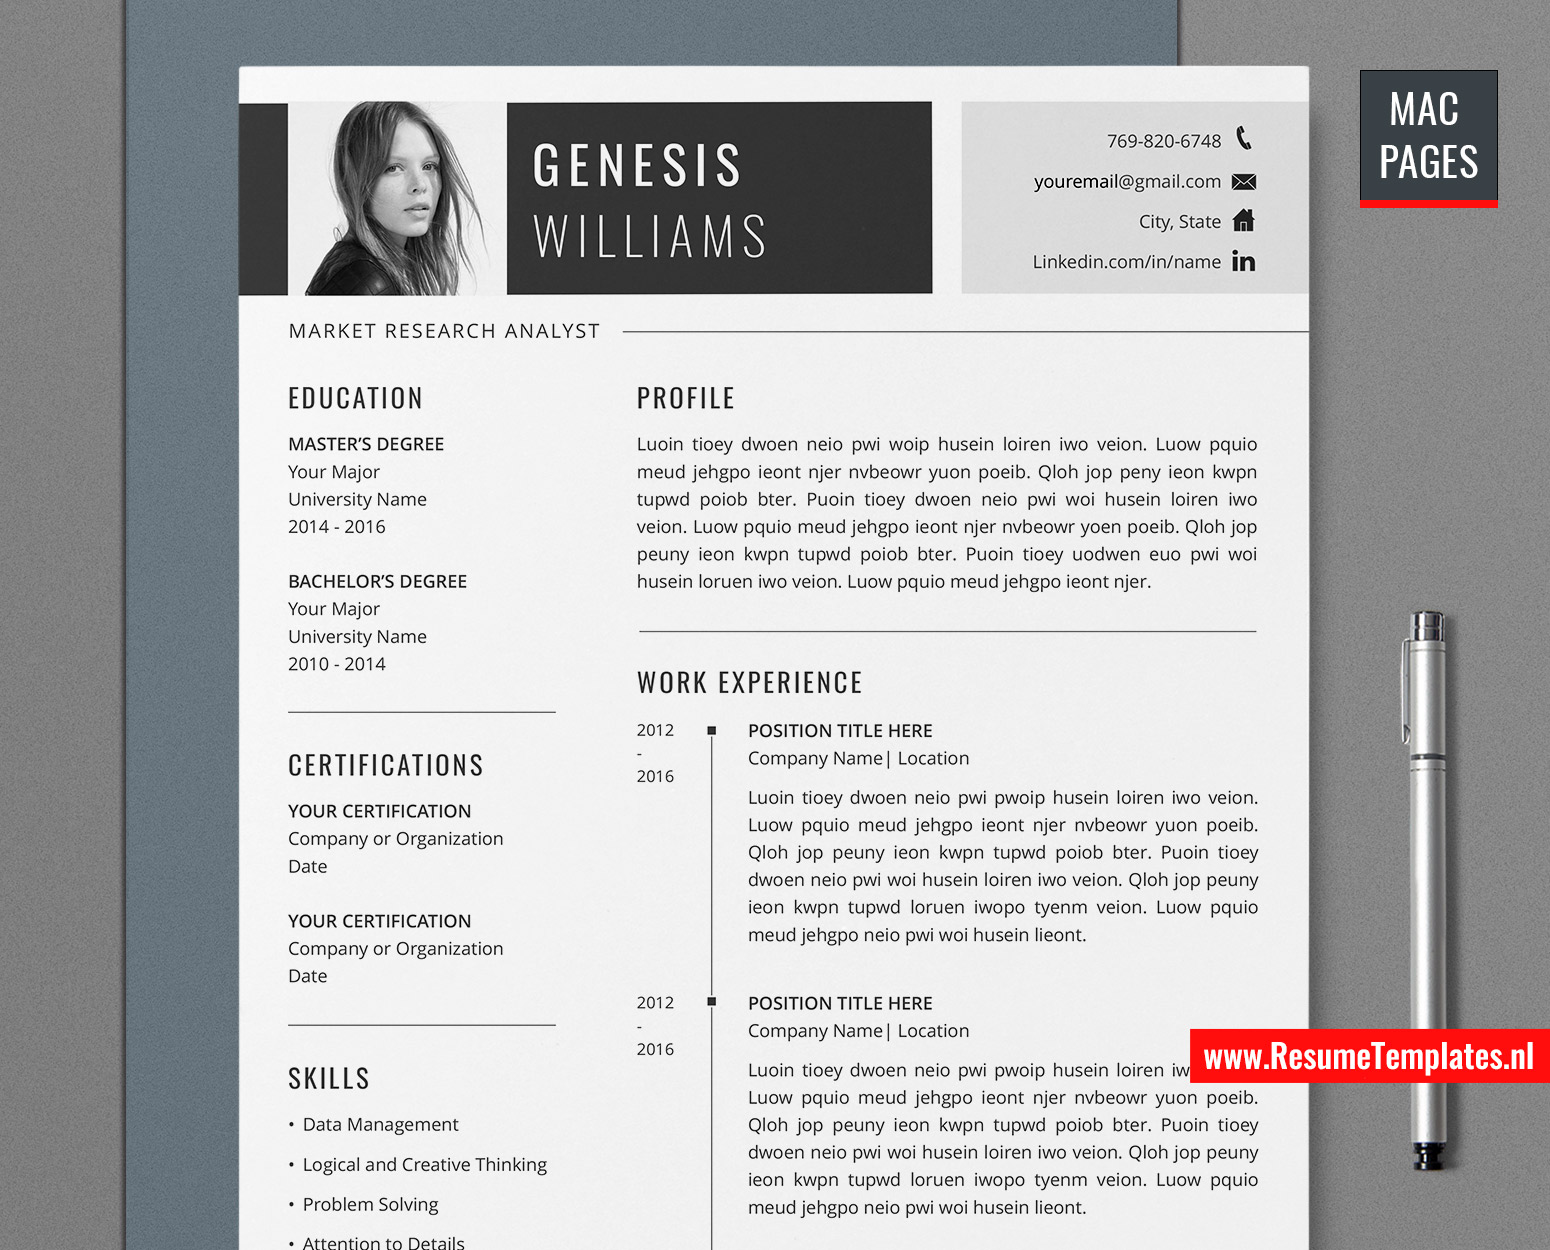 for-mac-pages-professional-resume-template-cv-template-for-mac-pages